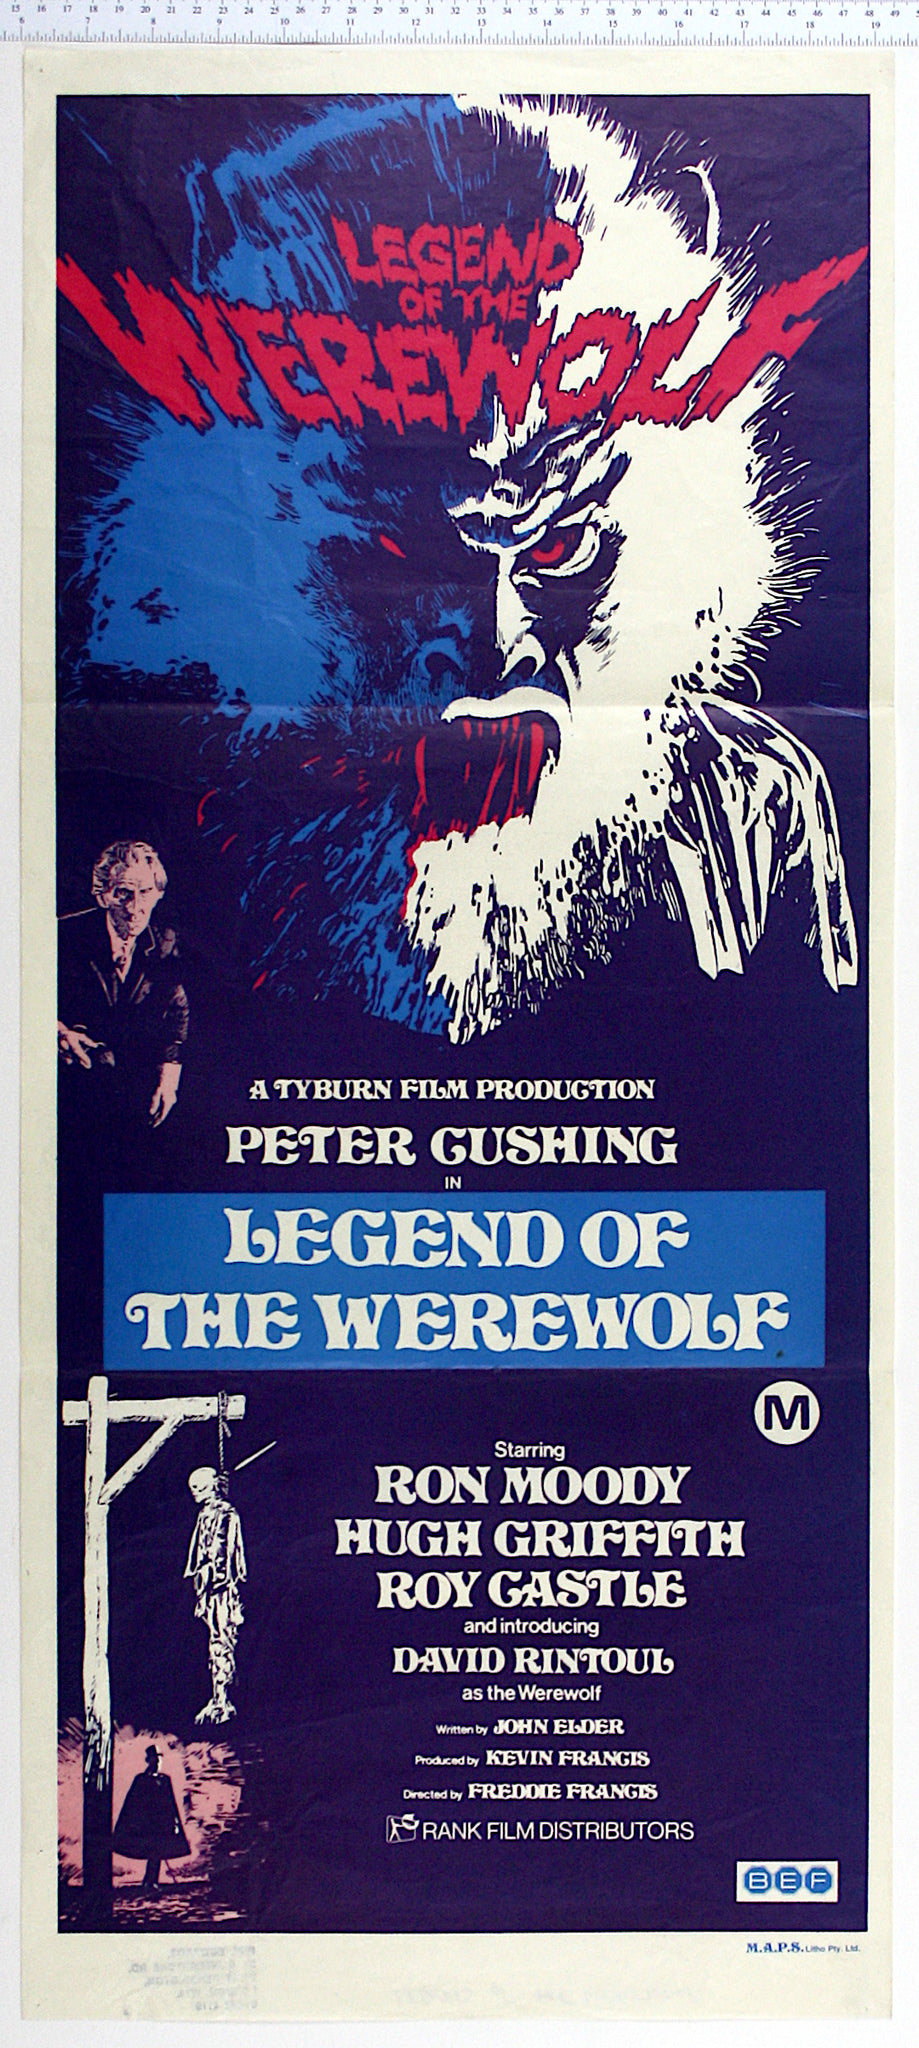 High contrast artwork of werewolf on blue, with red fangs, eyes and title. Under, Cushing and gibbet with hanged skeleton.